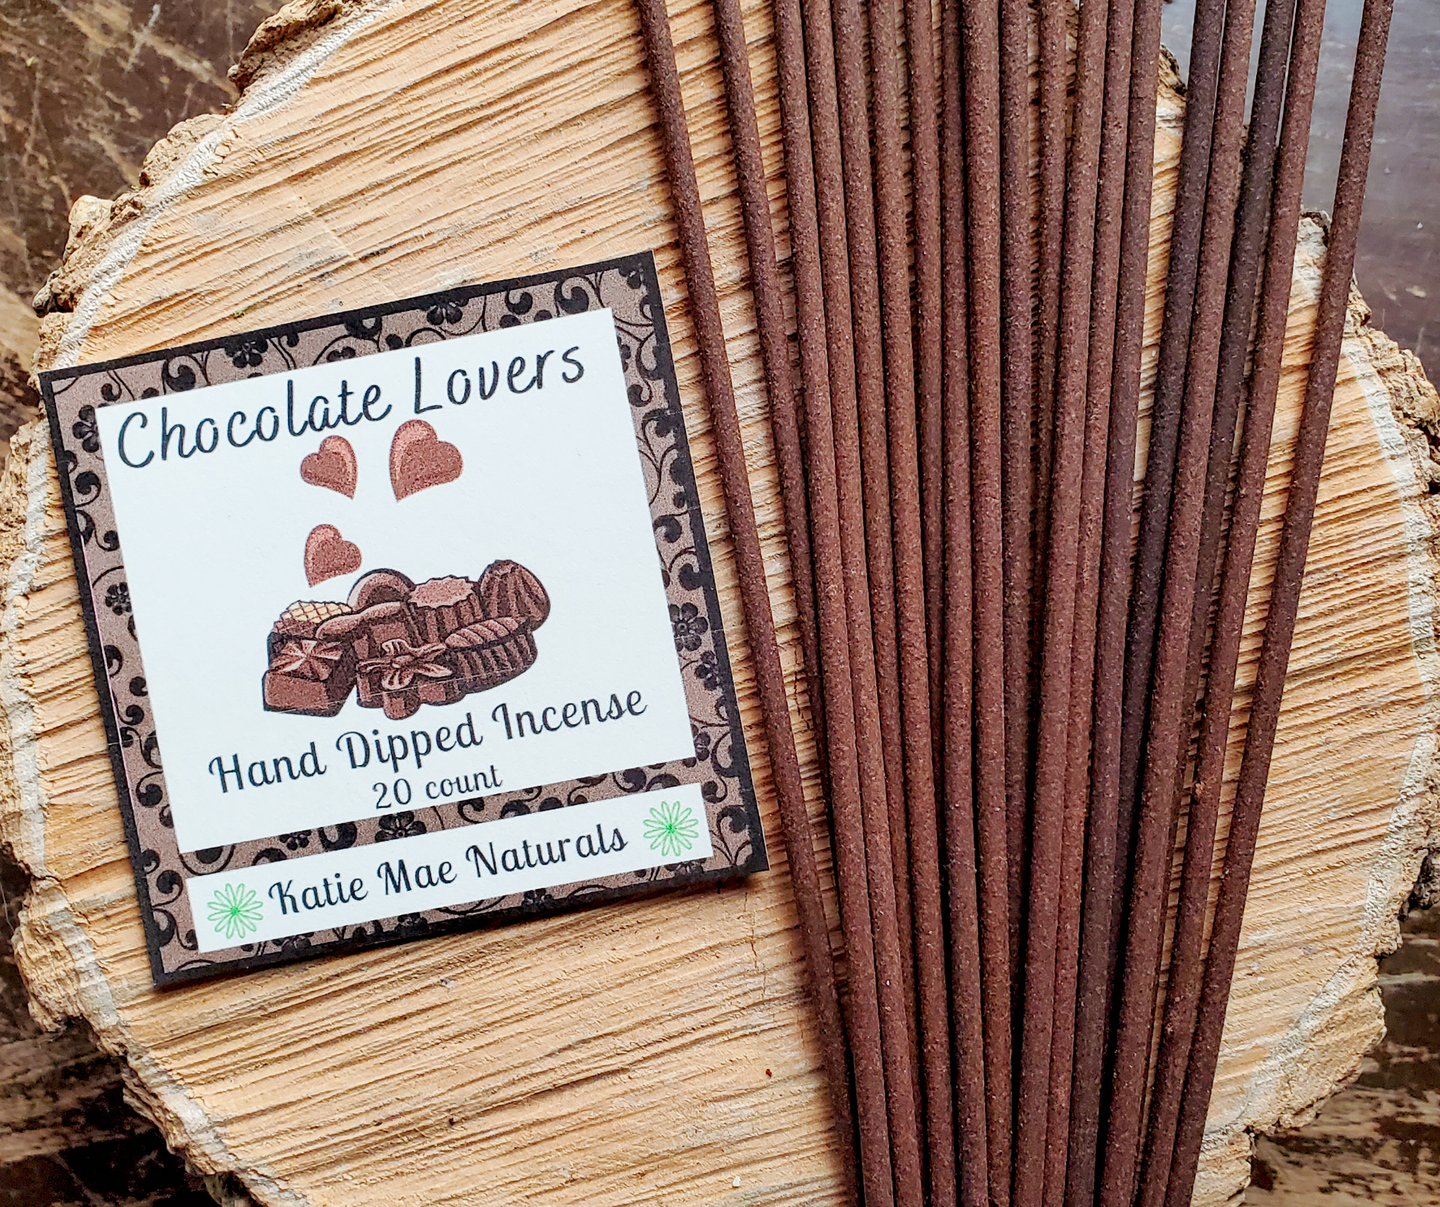 Chocolate Lovers Hand Dipped Incense Sticks - 20 pack